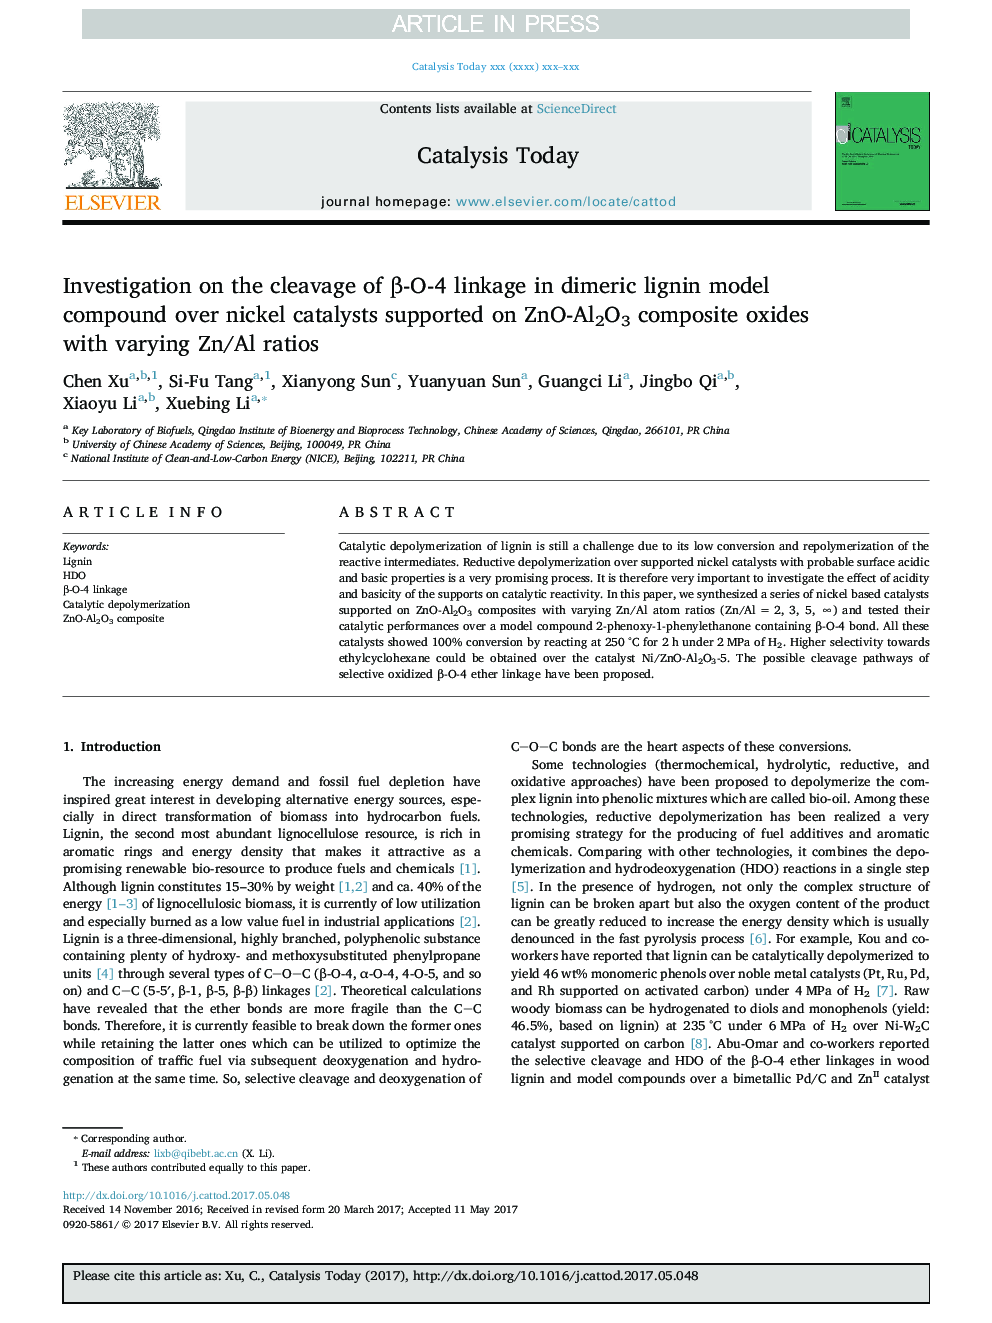 Investigation on the cleavage of Î²-O-4 linkage in dimeric lignin model compound over nickel catalysts supported on ZnO-Al2O3 composite oxides with varying Zn/Al ratios